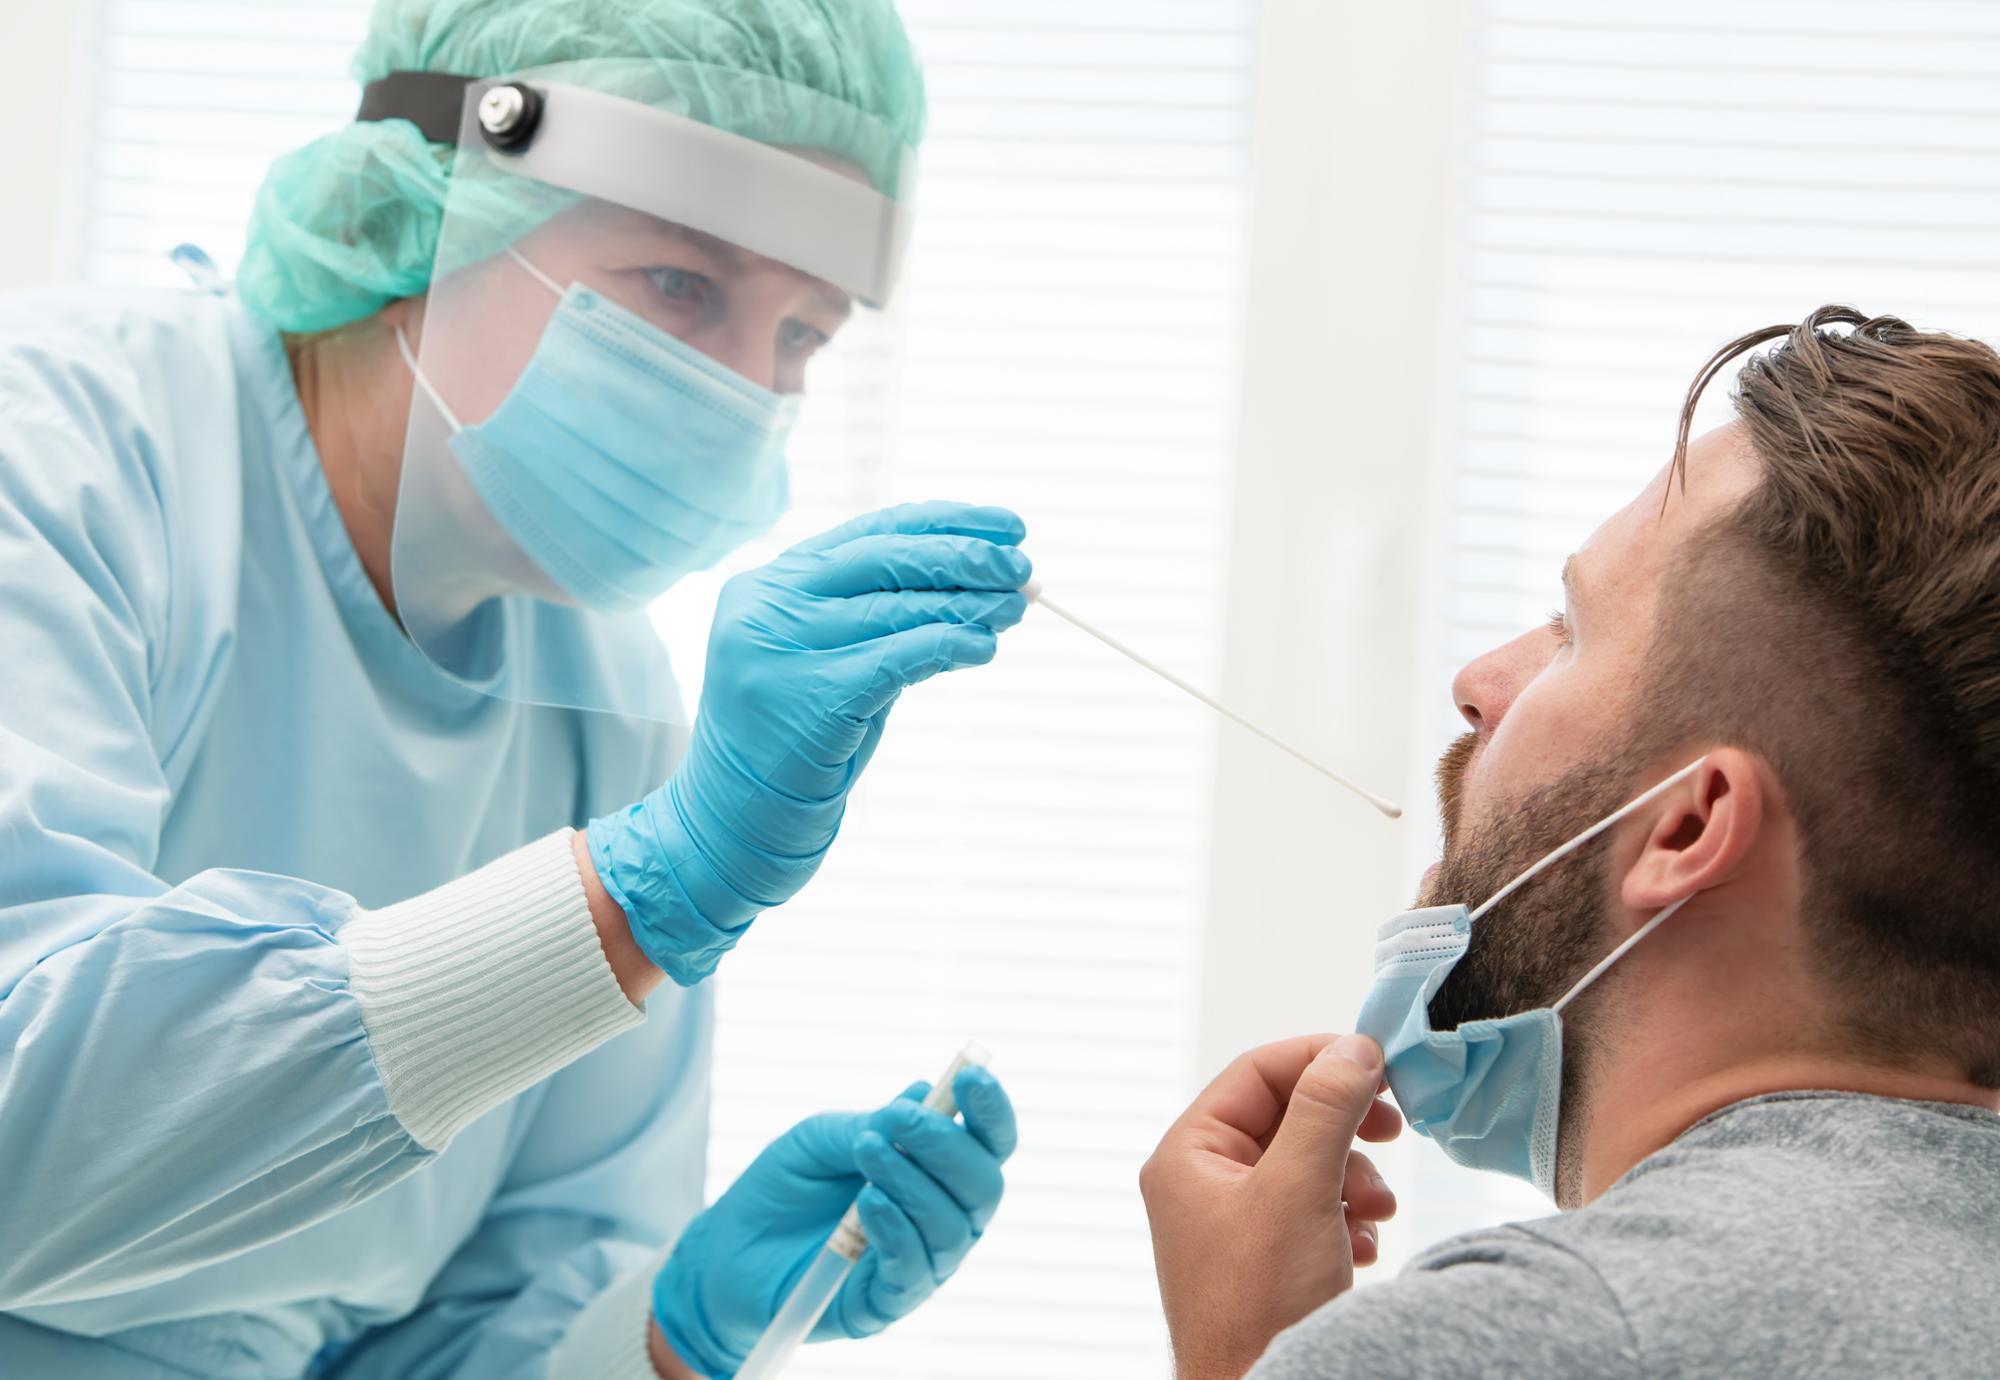 Health professional carrying out a nasal swab on a patient